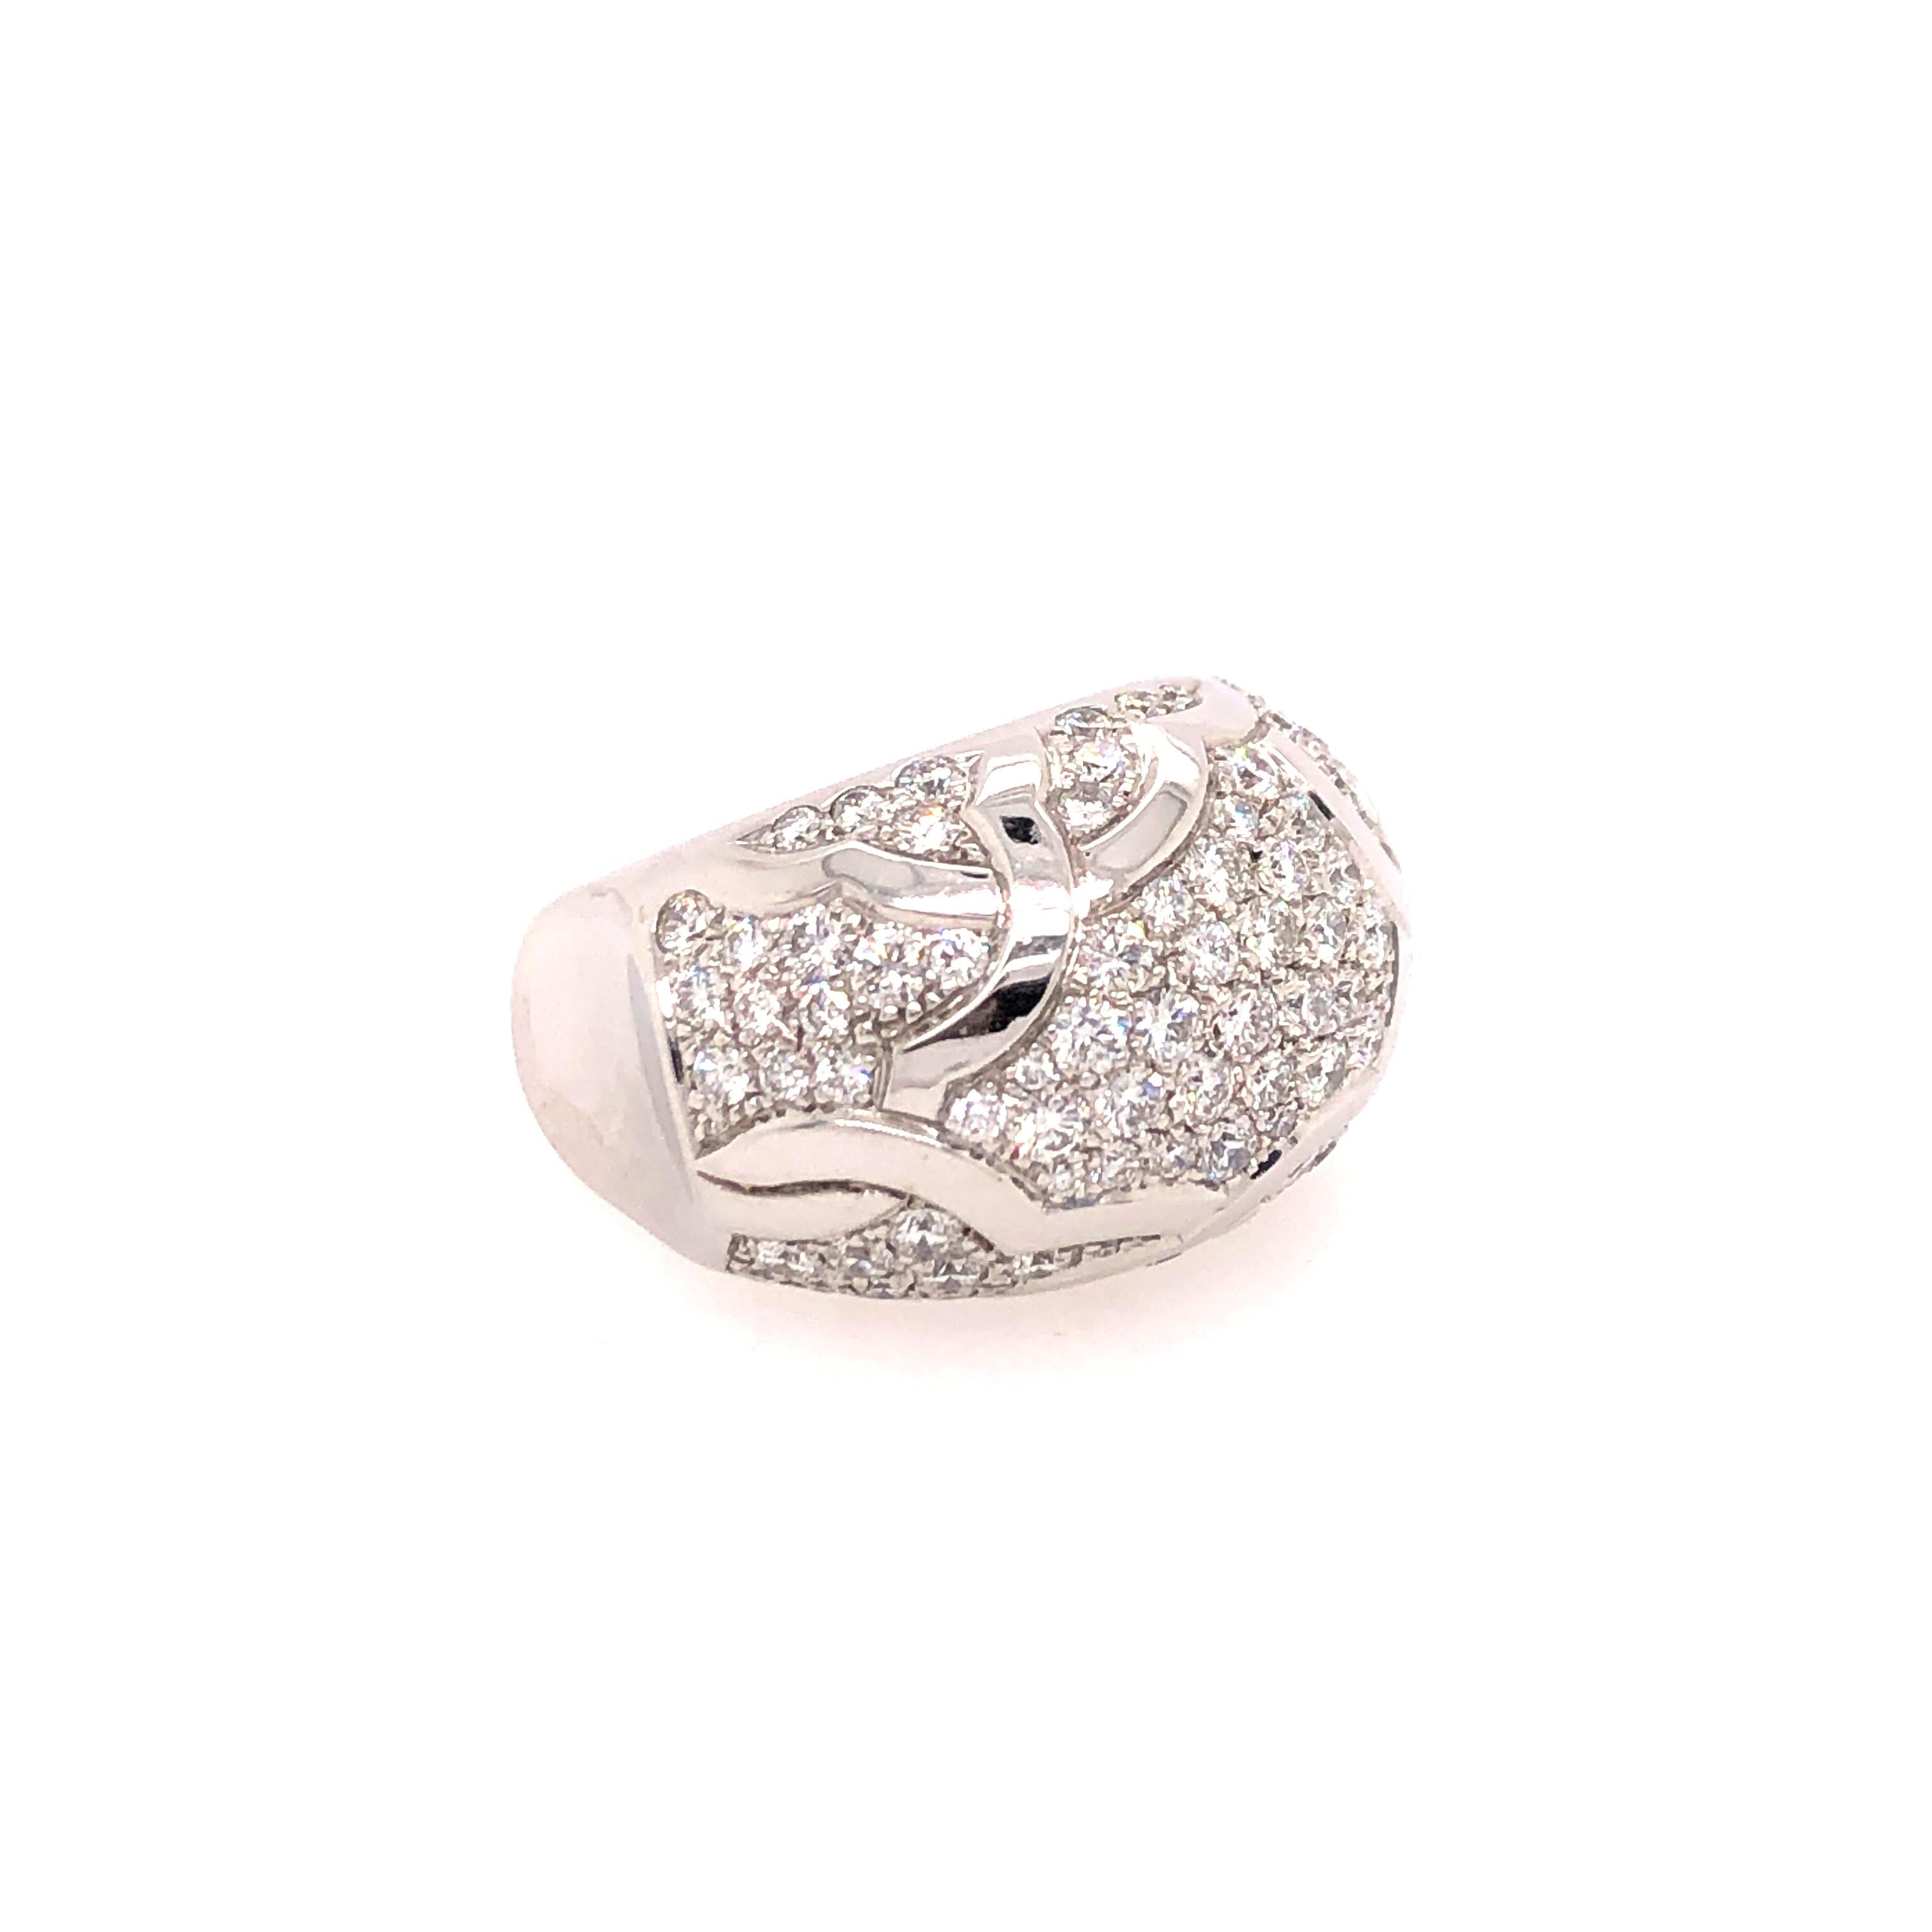 Big sparkle in a flower inspired design, Chanel has designed this ring to start conversations. 3.50CTS of fine white diamonds (quality e-f color and vs clarity) fill every corner of the domed floral design. 

Size: 5.5

From the Skibell Estate